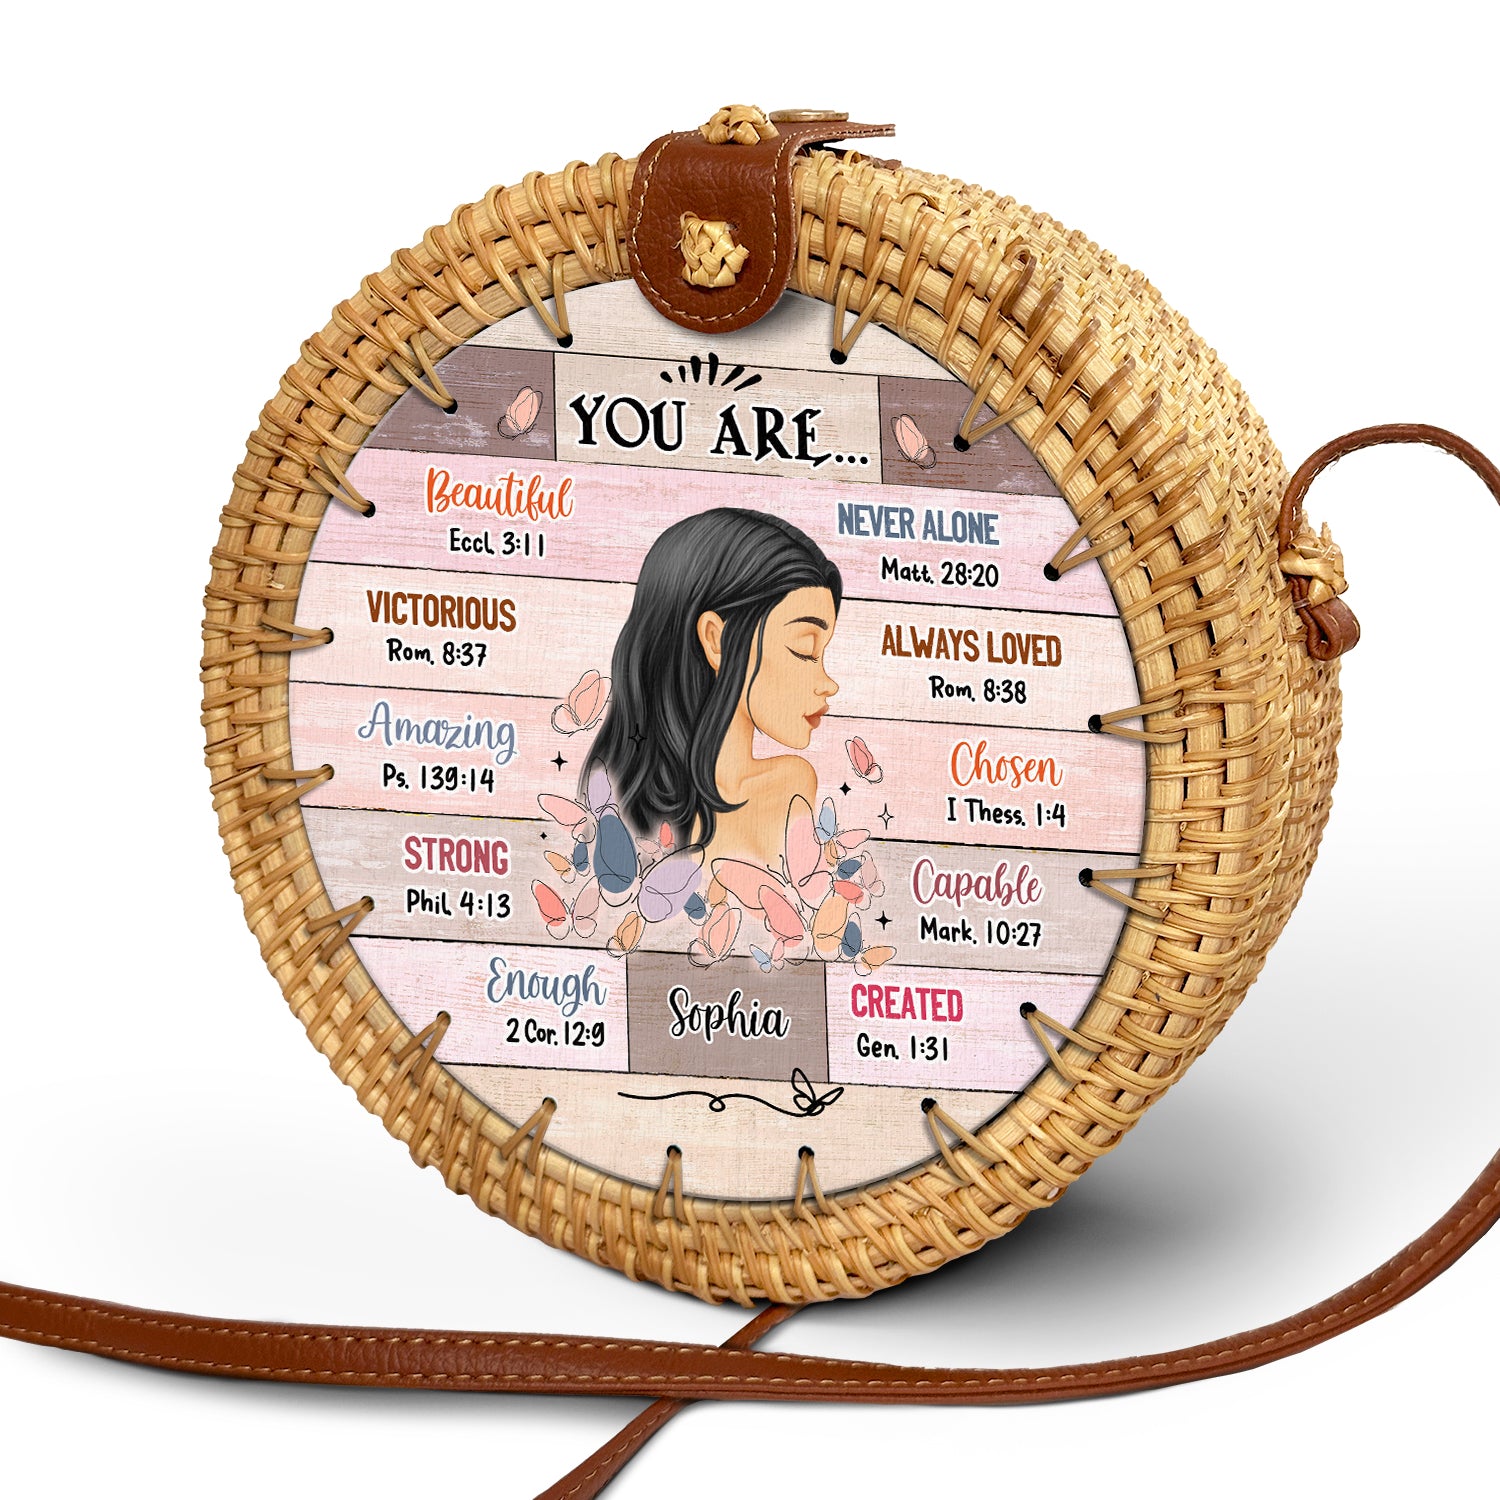 You Are Beautiful - Gift For Yourself, Gift For Women - Personalized Round Rattan Bag